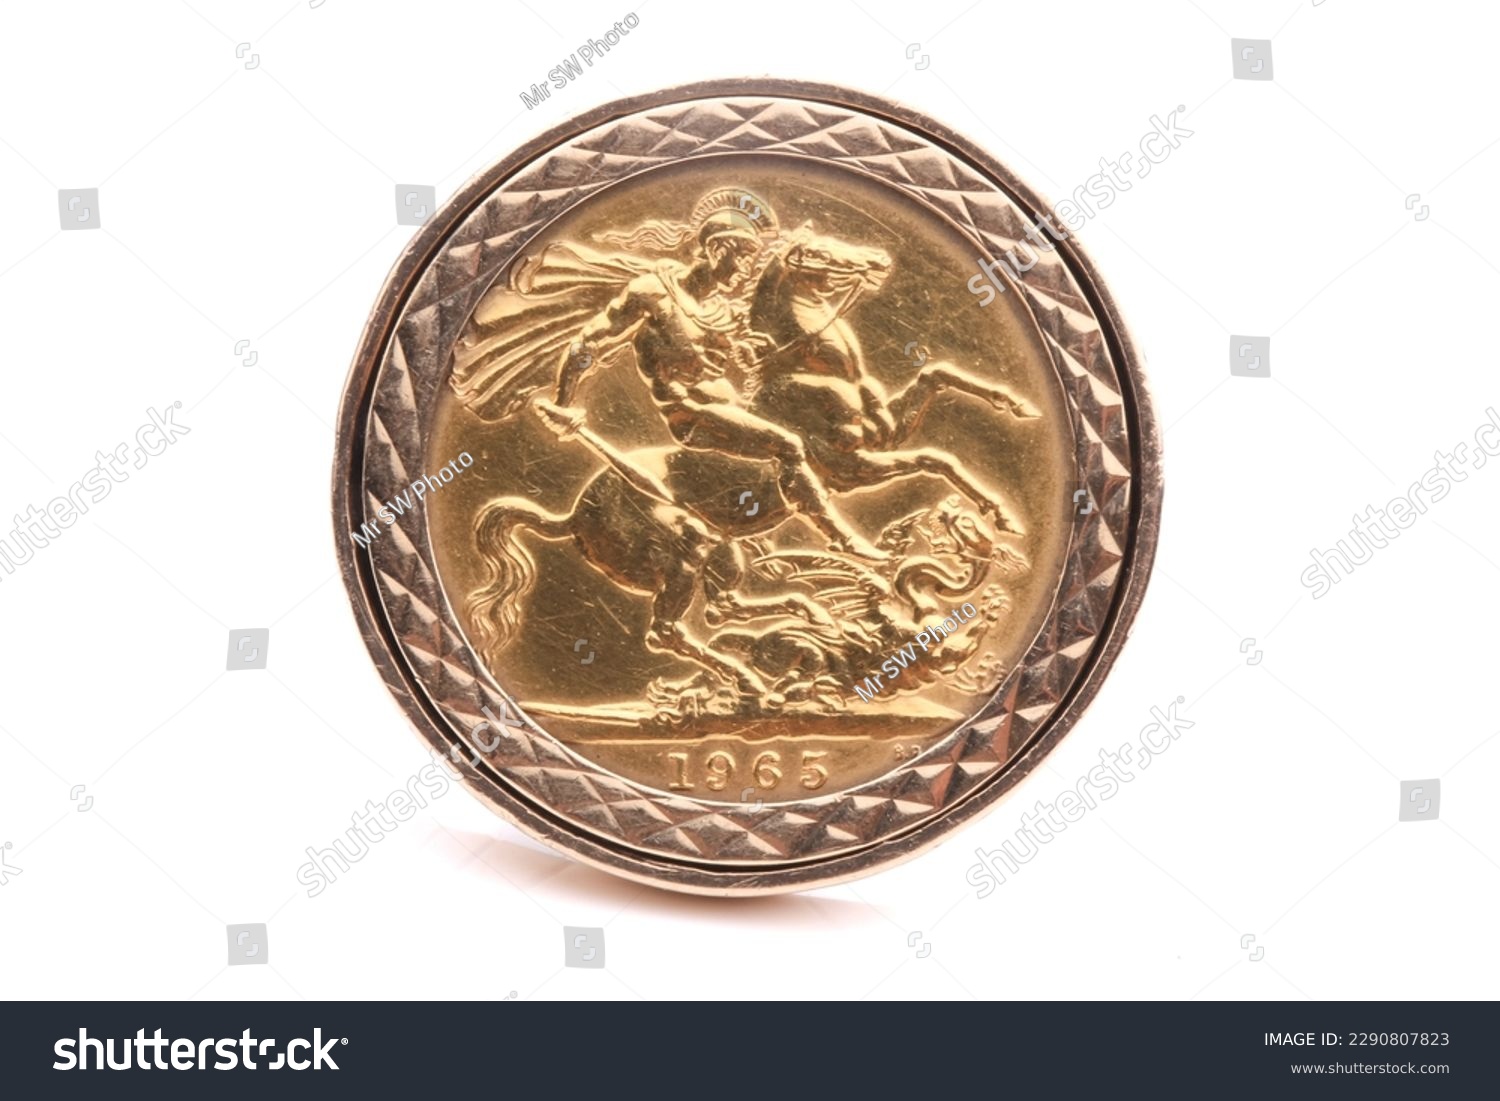 A chunky and heavy gold ring with a gold sovereign coin mounted in it. Isolated on White. #2290807823